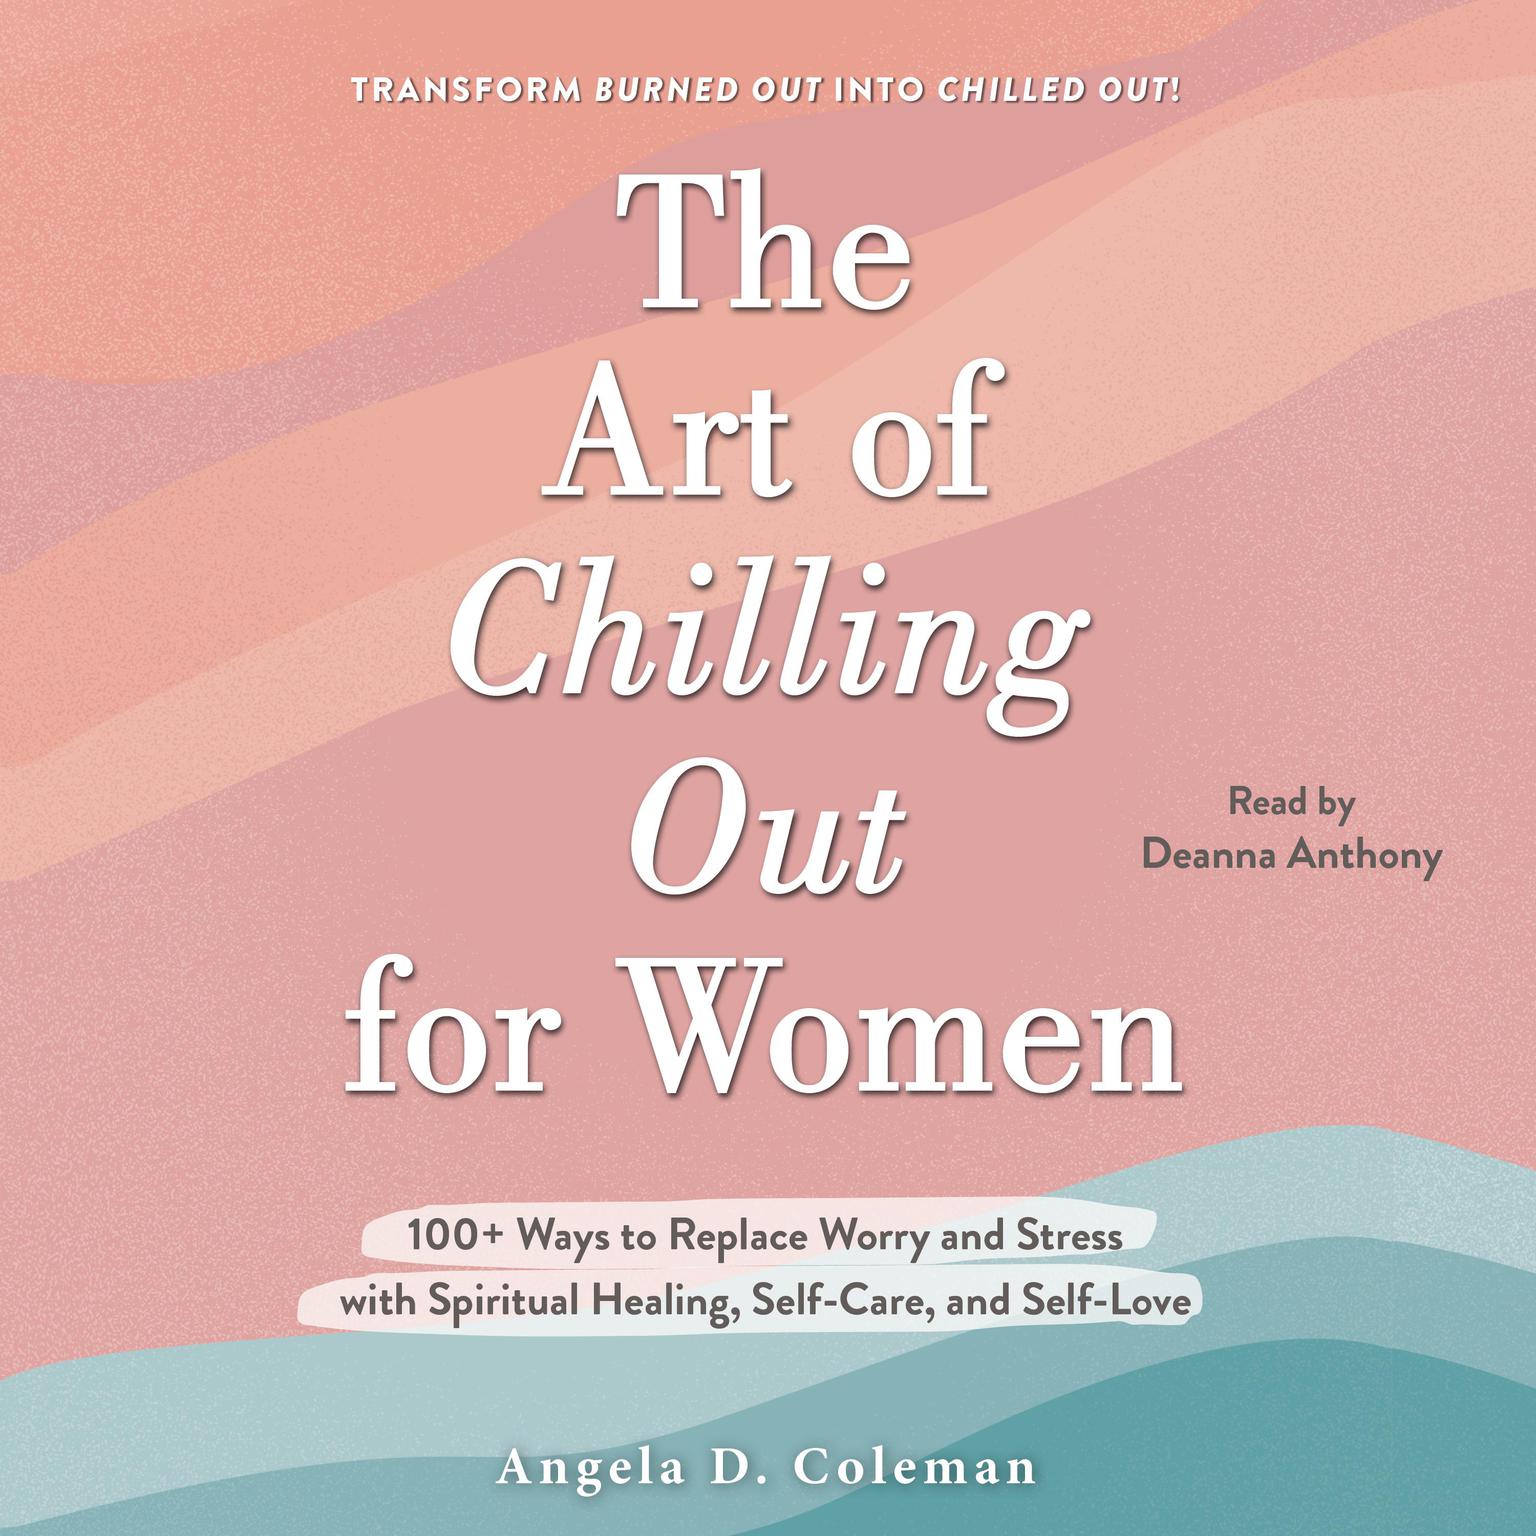 The Art of Chilling Out for Women: 100+ Ways to Replace Worry and Stress with Spiritual Healing, Self-Care, and Self-Love Audiobook, by Angela D. Coleman